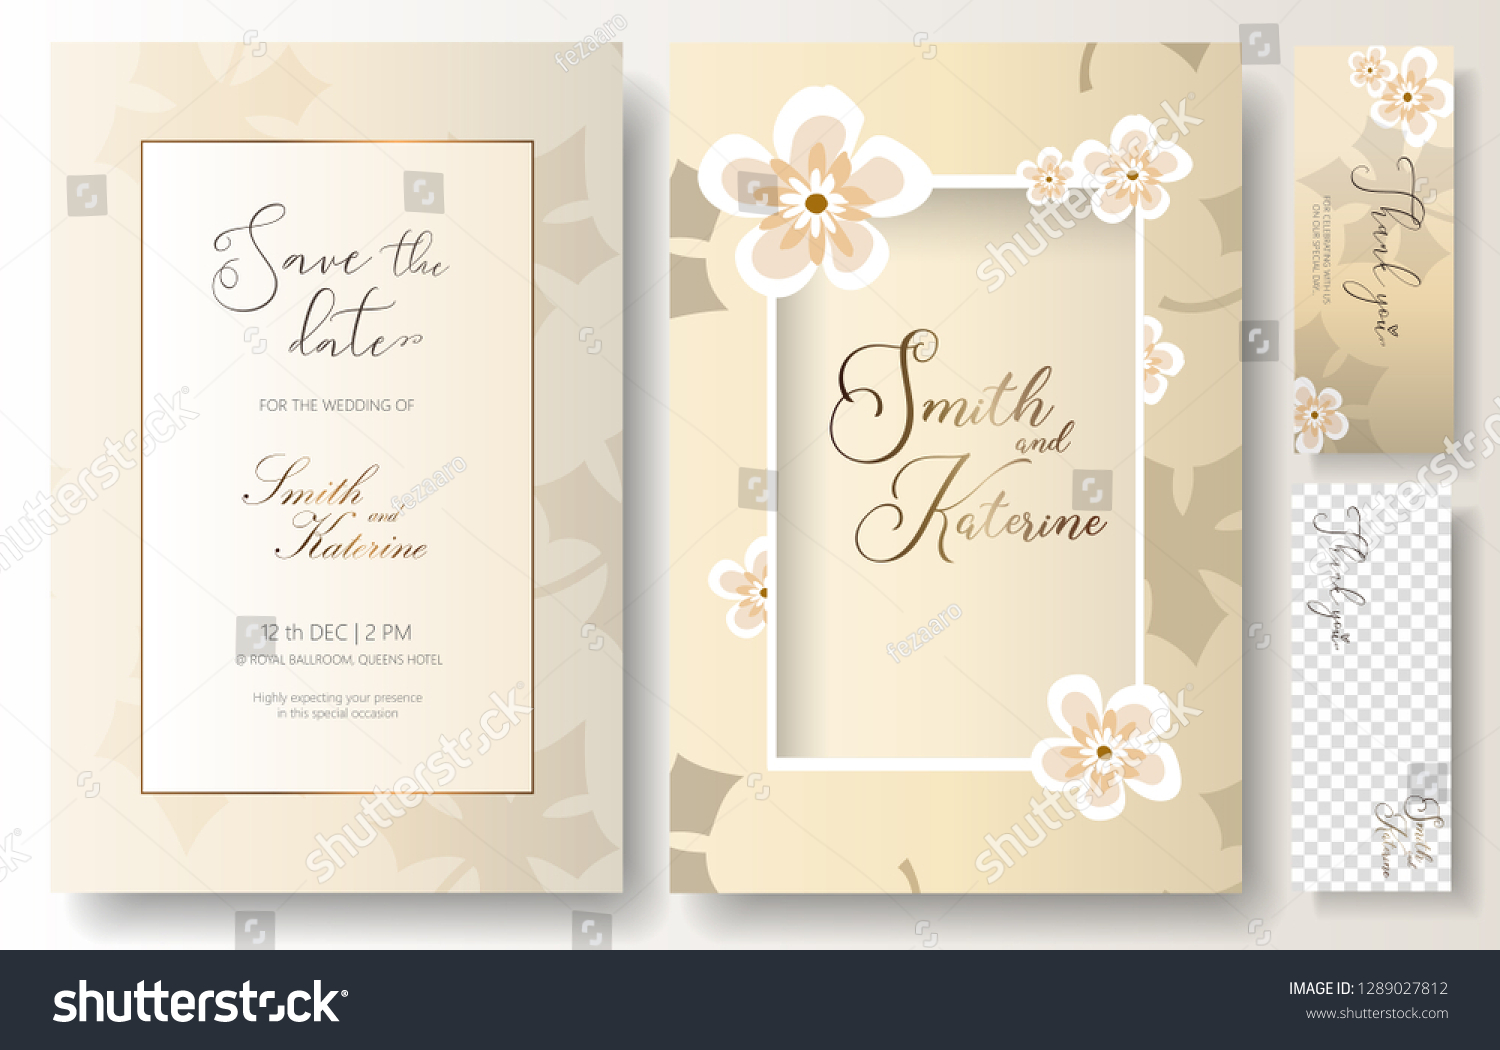 save date special day wedding anniversary stock vector